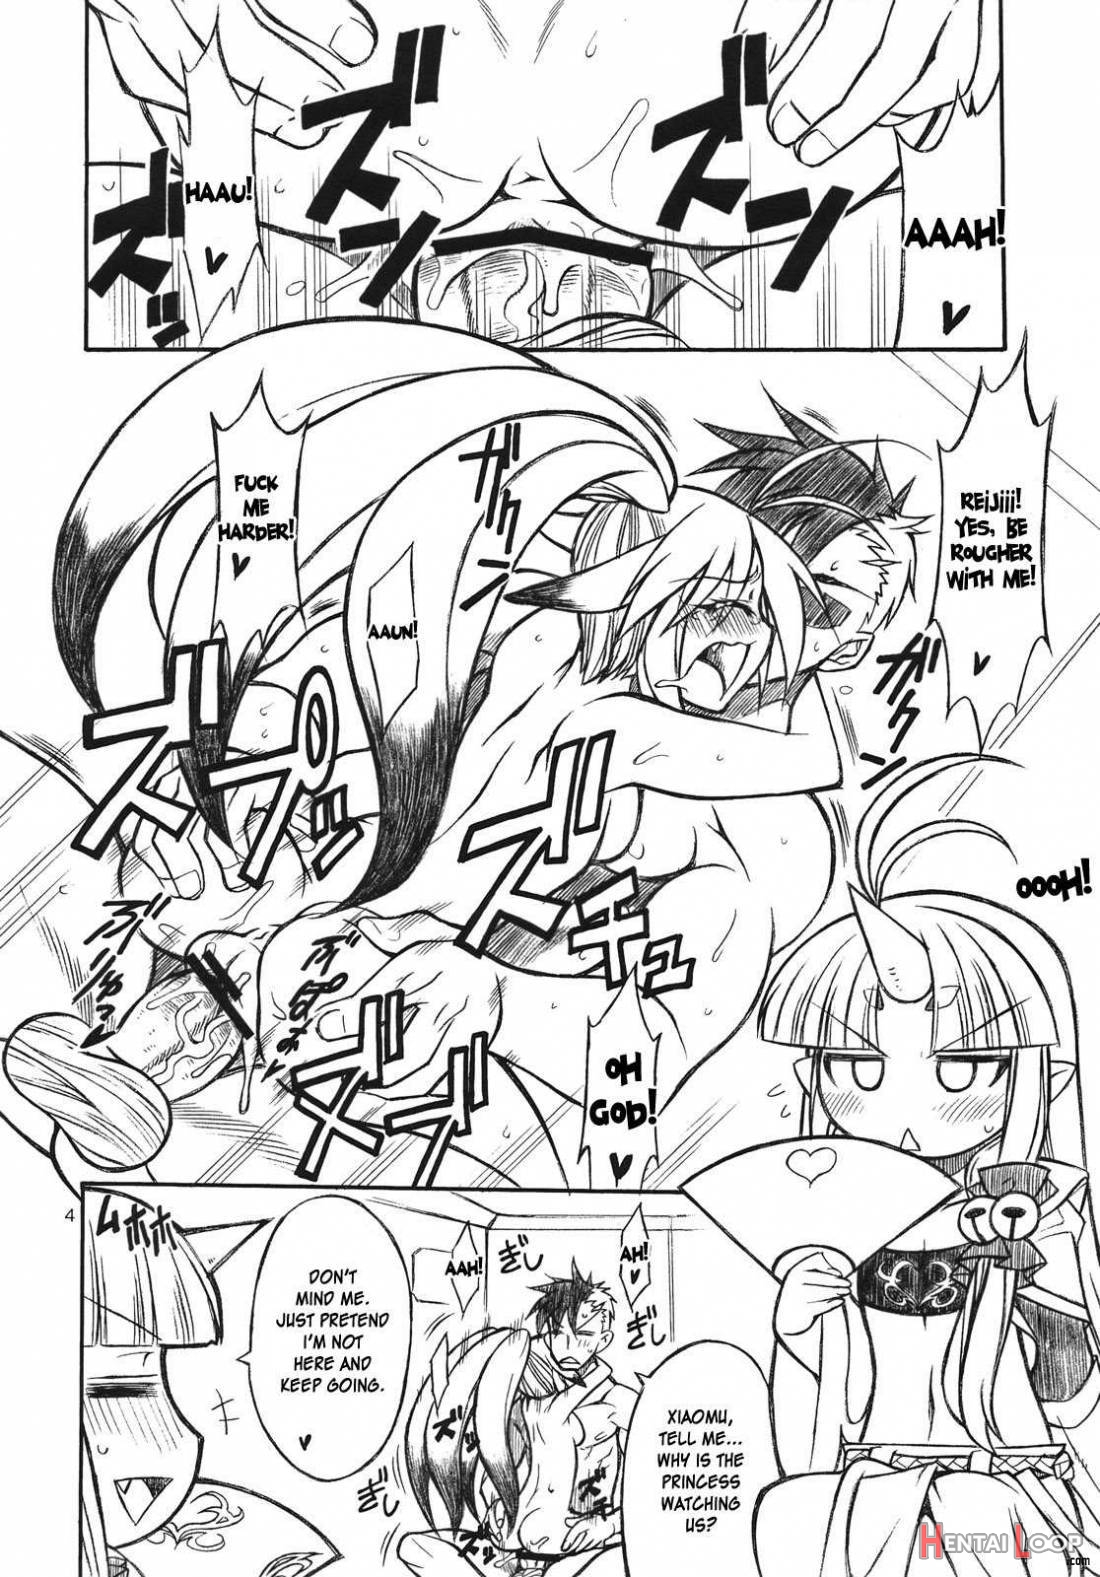 Mugen Otome page 3